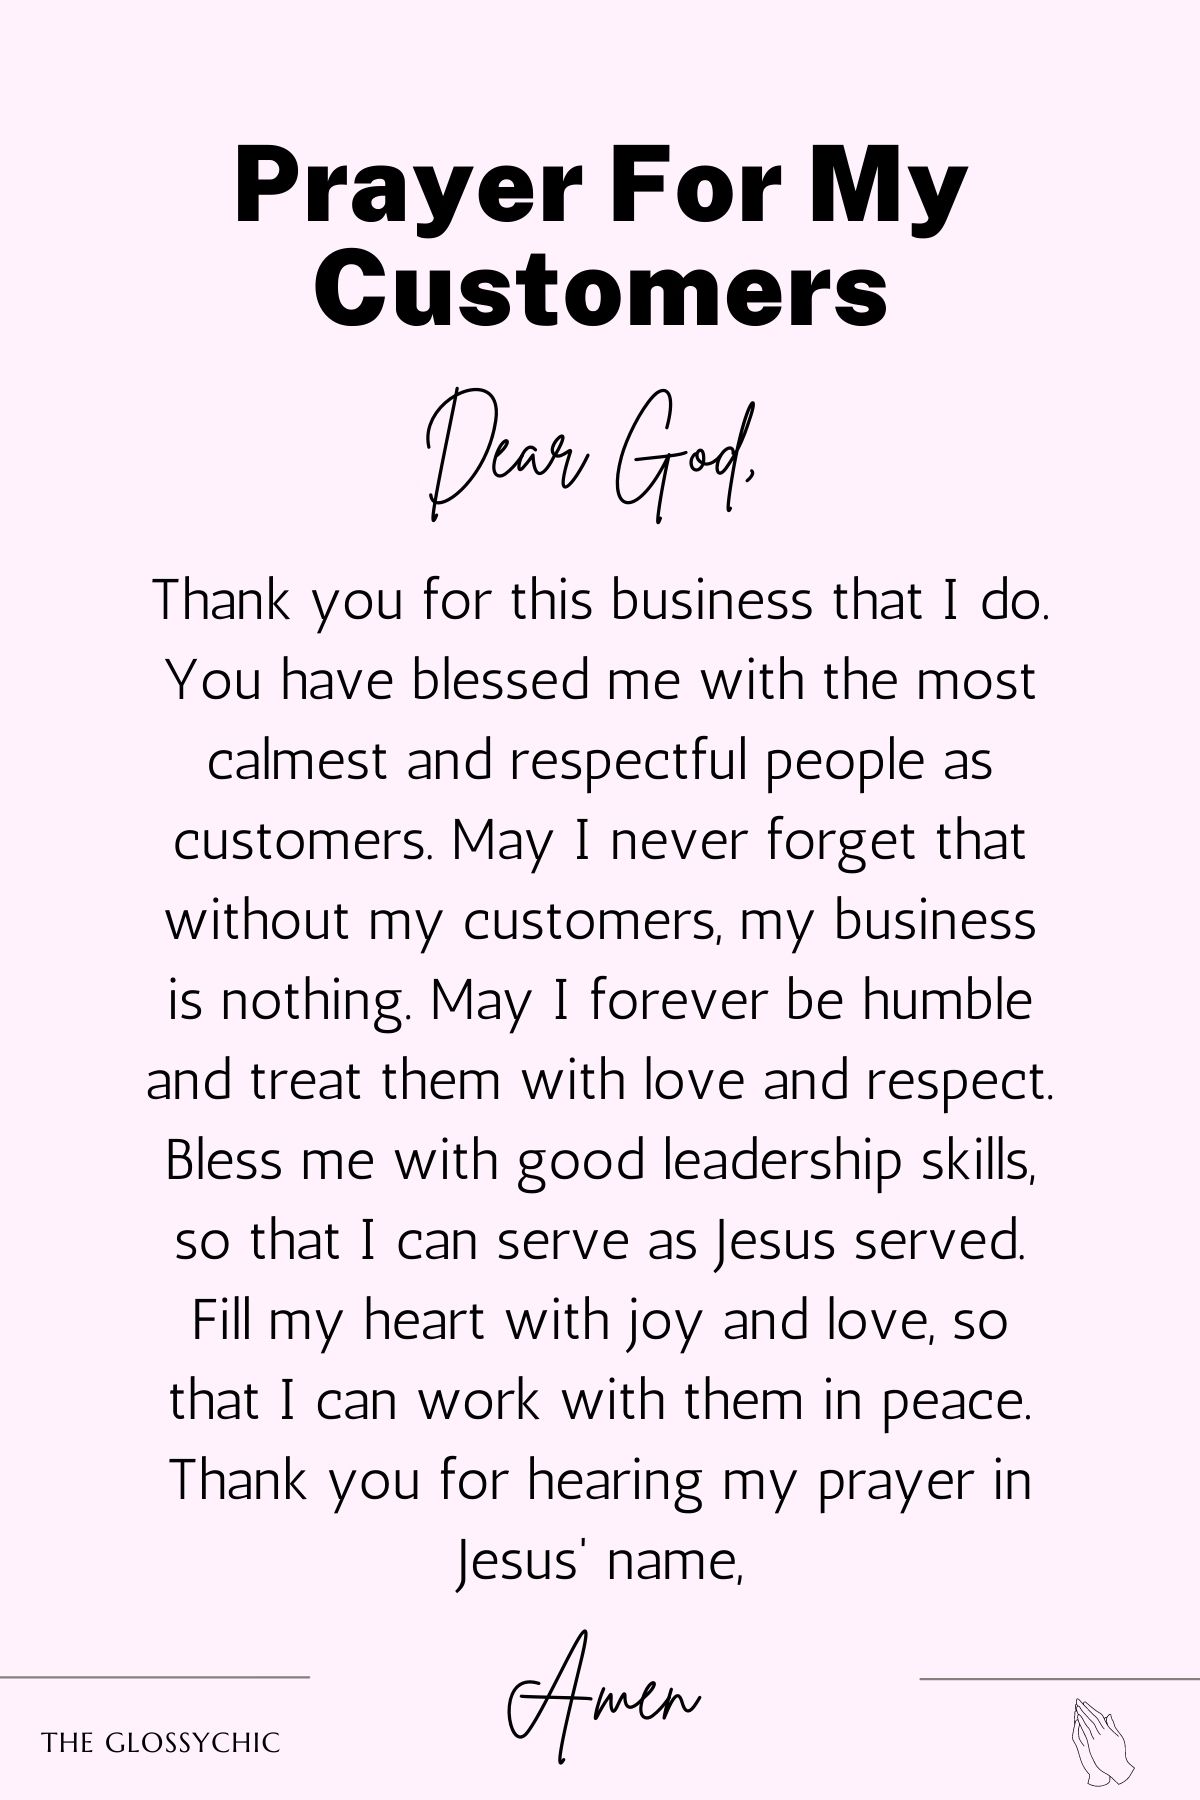 Prayer for my customers - business prayer points